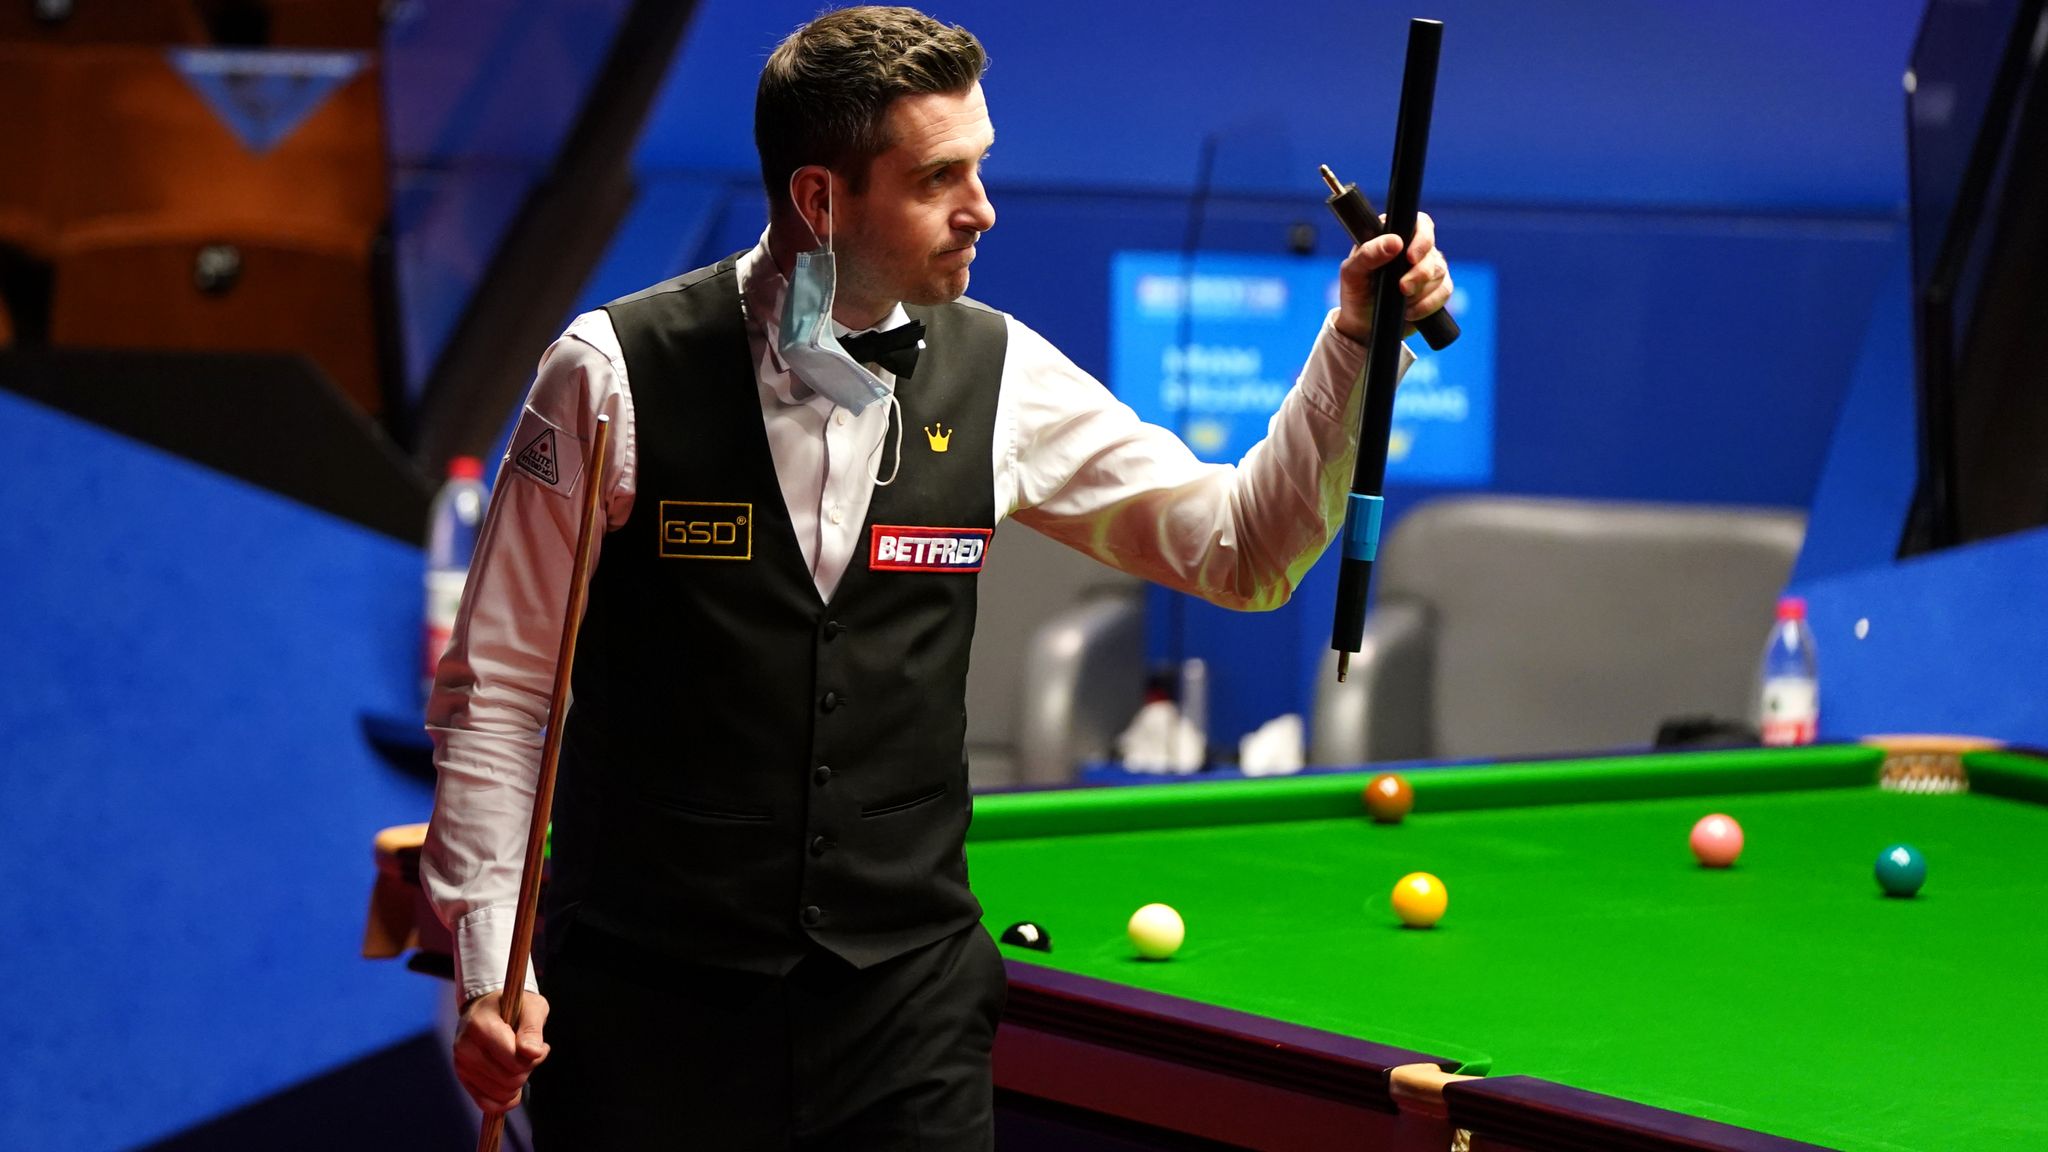 World Snooker Championship Kyren Wilson and Mark Selby through to semi-finals at Crucible Snooker News Sky Sports